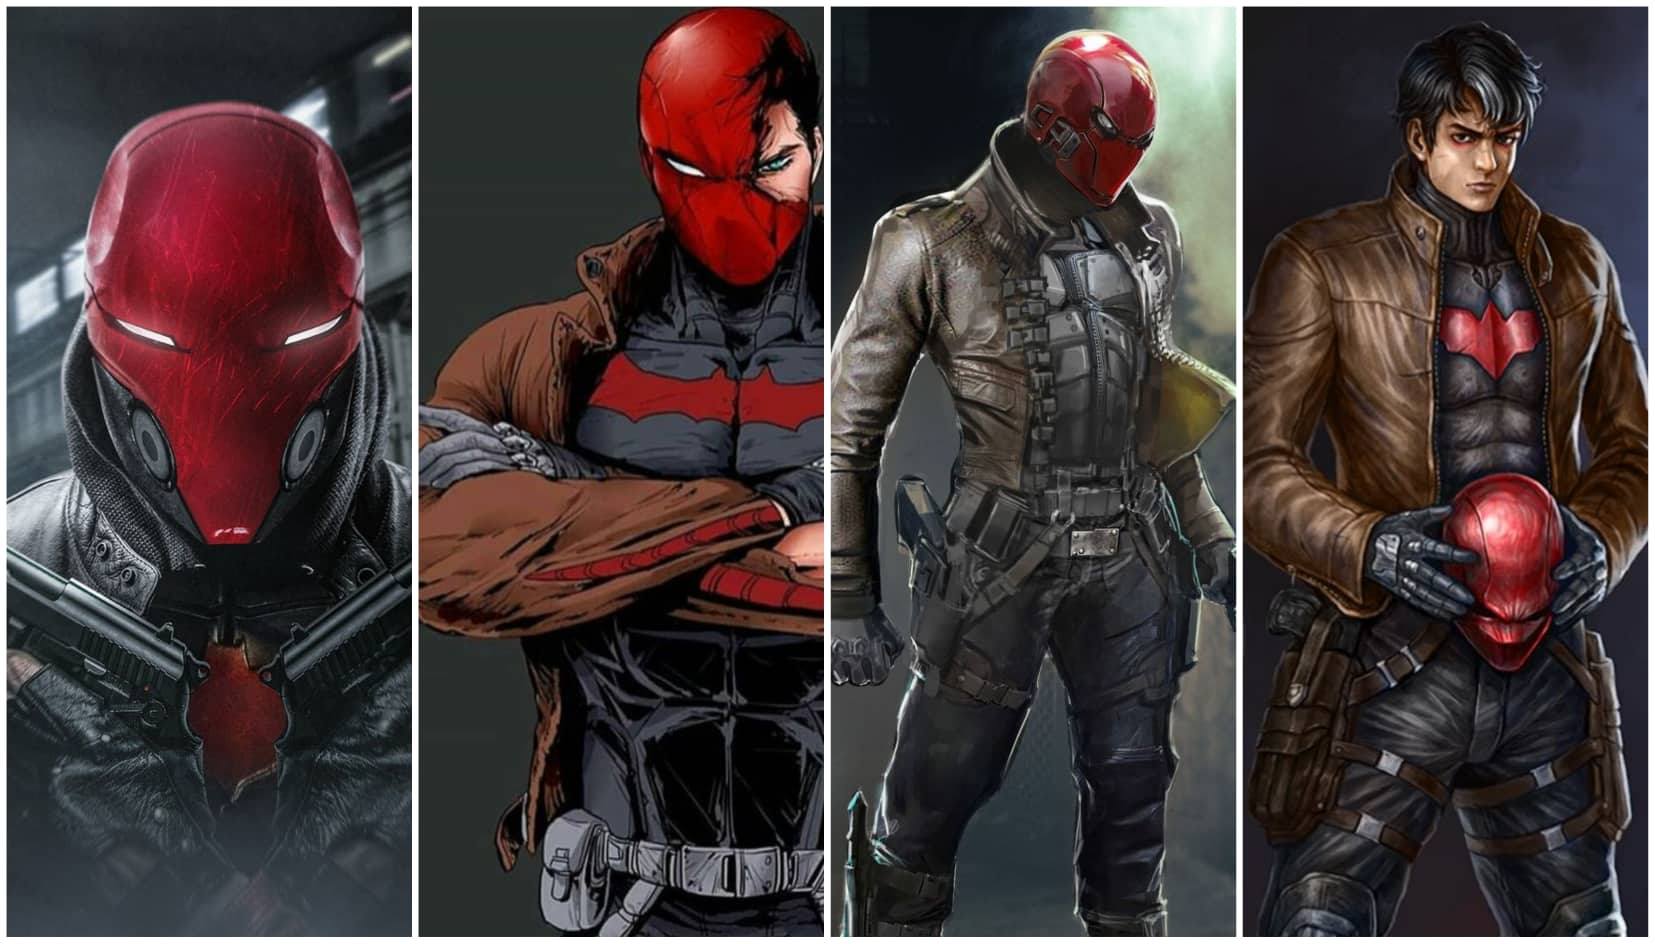 The Red Hood is another name used by various fictional characters and a cri...